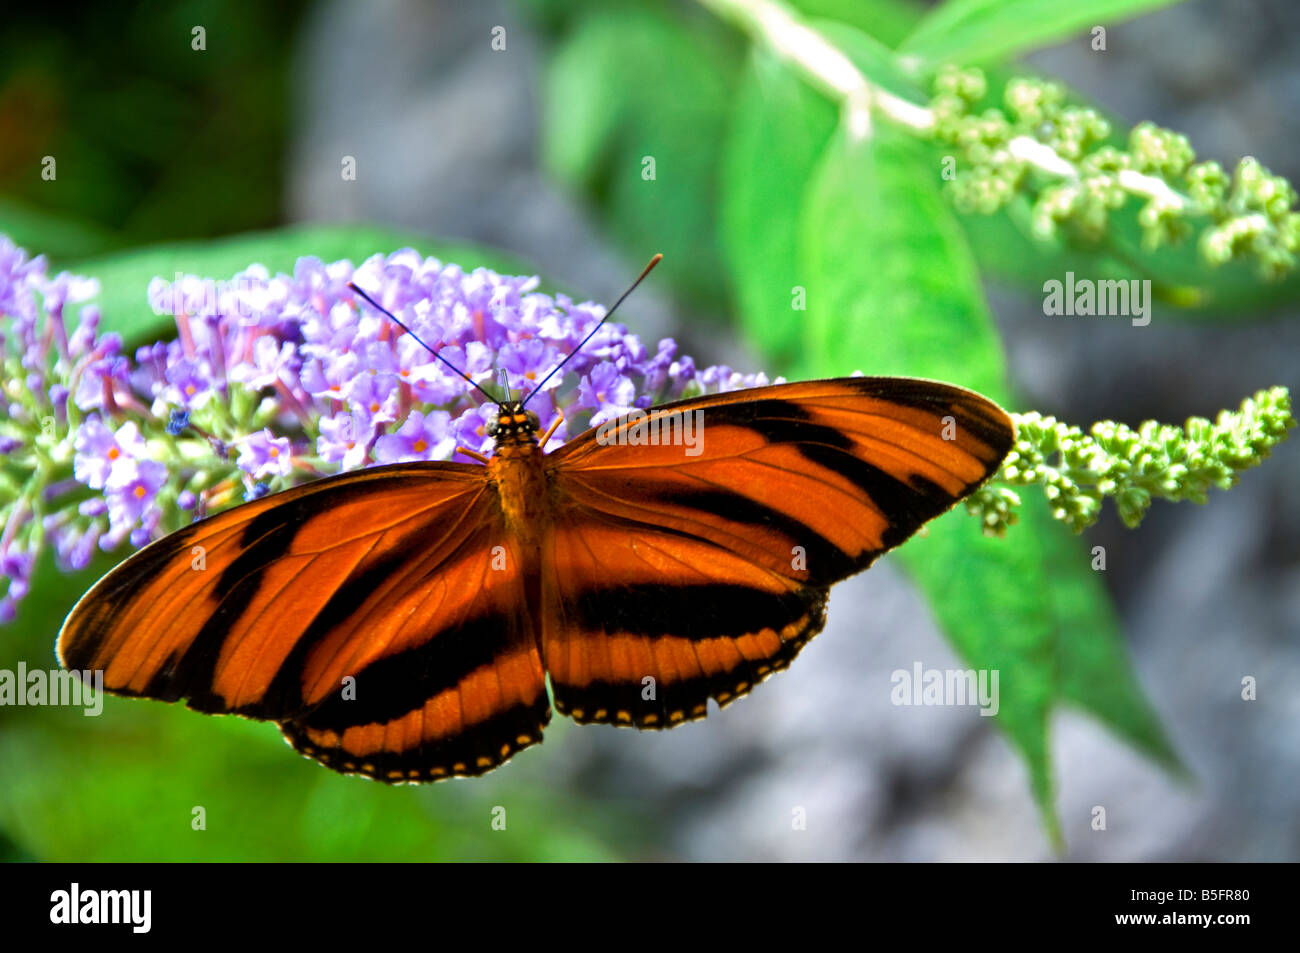 Butterfly Orange and black striped Tiger butterfly taking nectar in a natural lush habitat Stock Photo